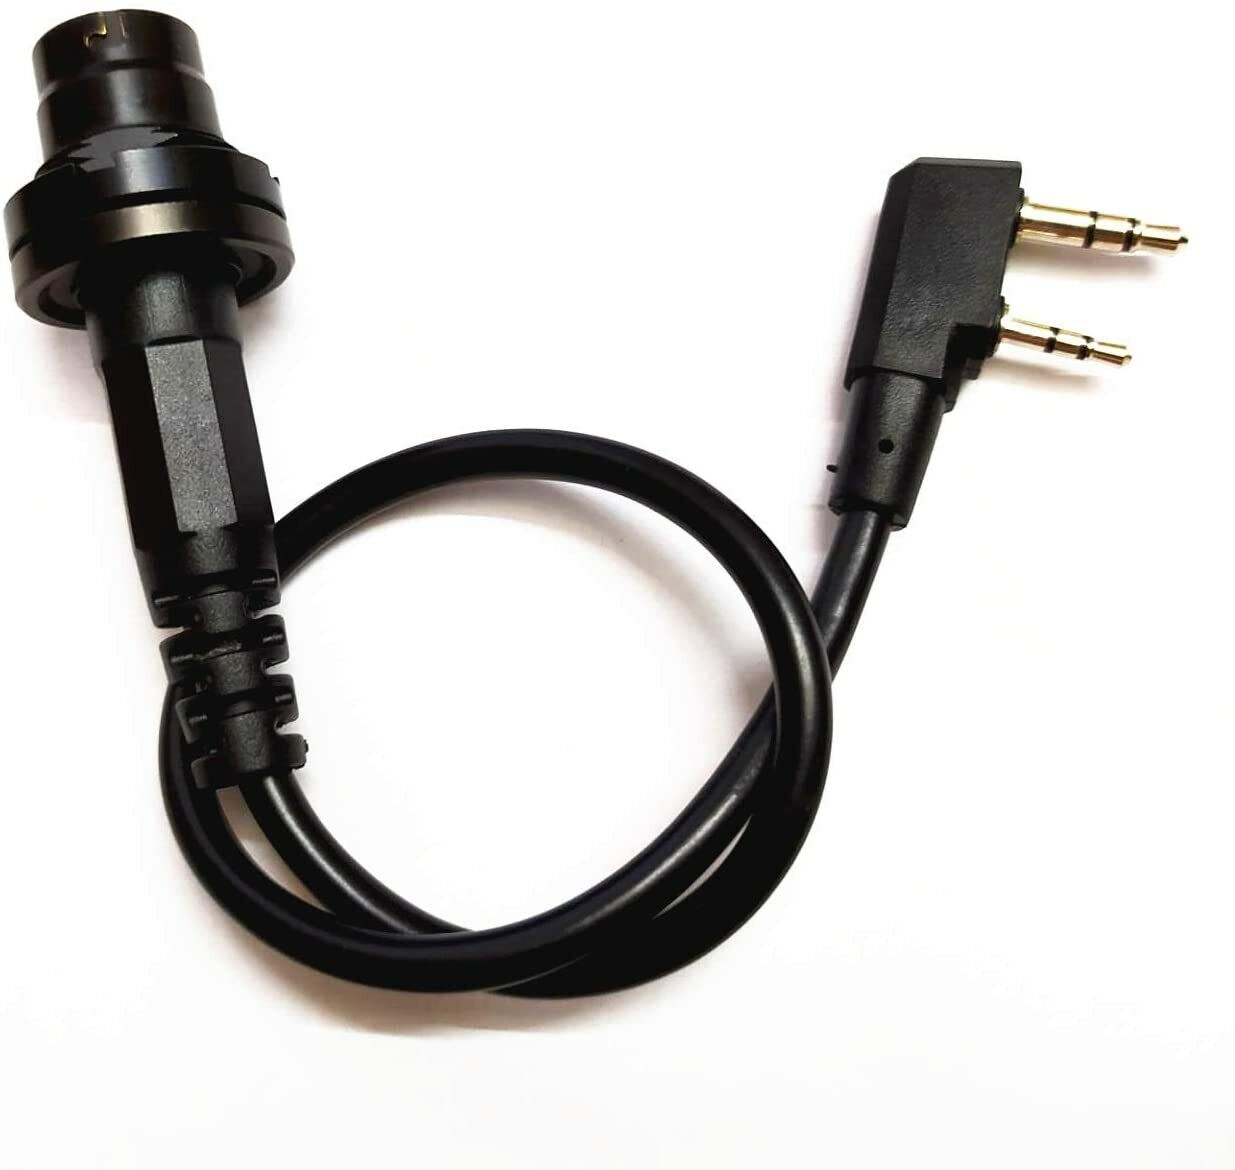 6-Pin PRC-148 152 Radio PTT Adapter Cable Compatible with Kenwood/Baofeng